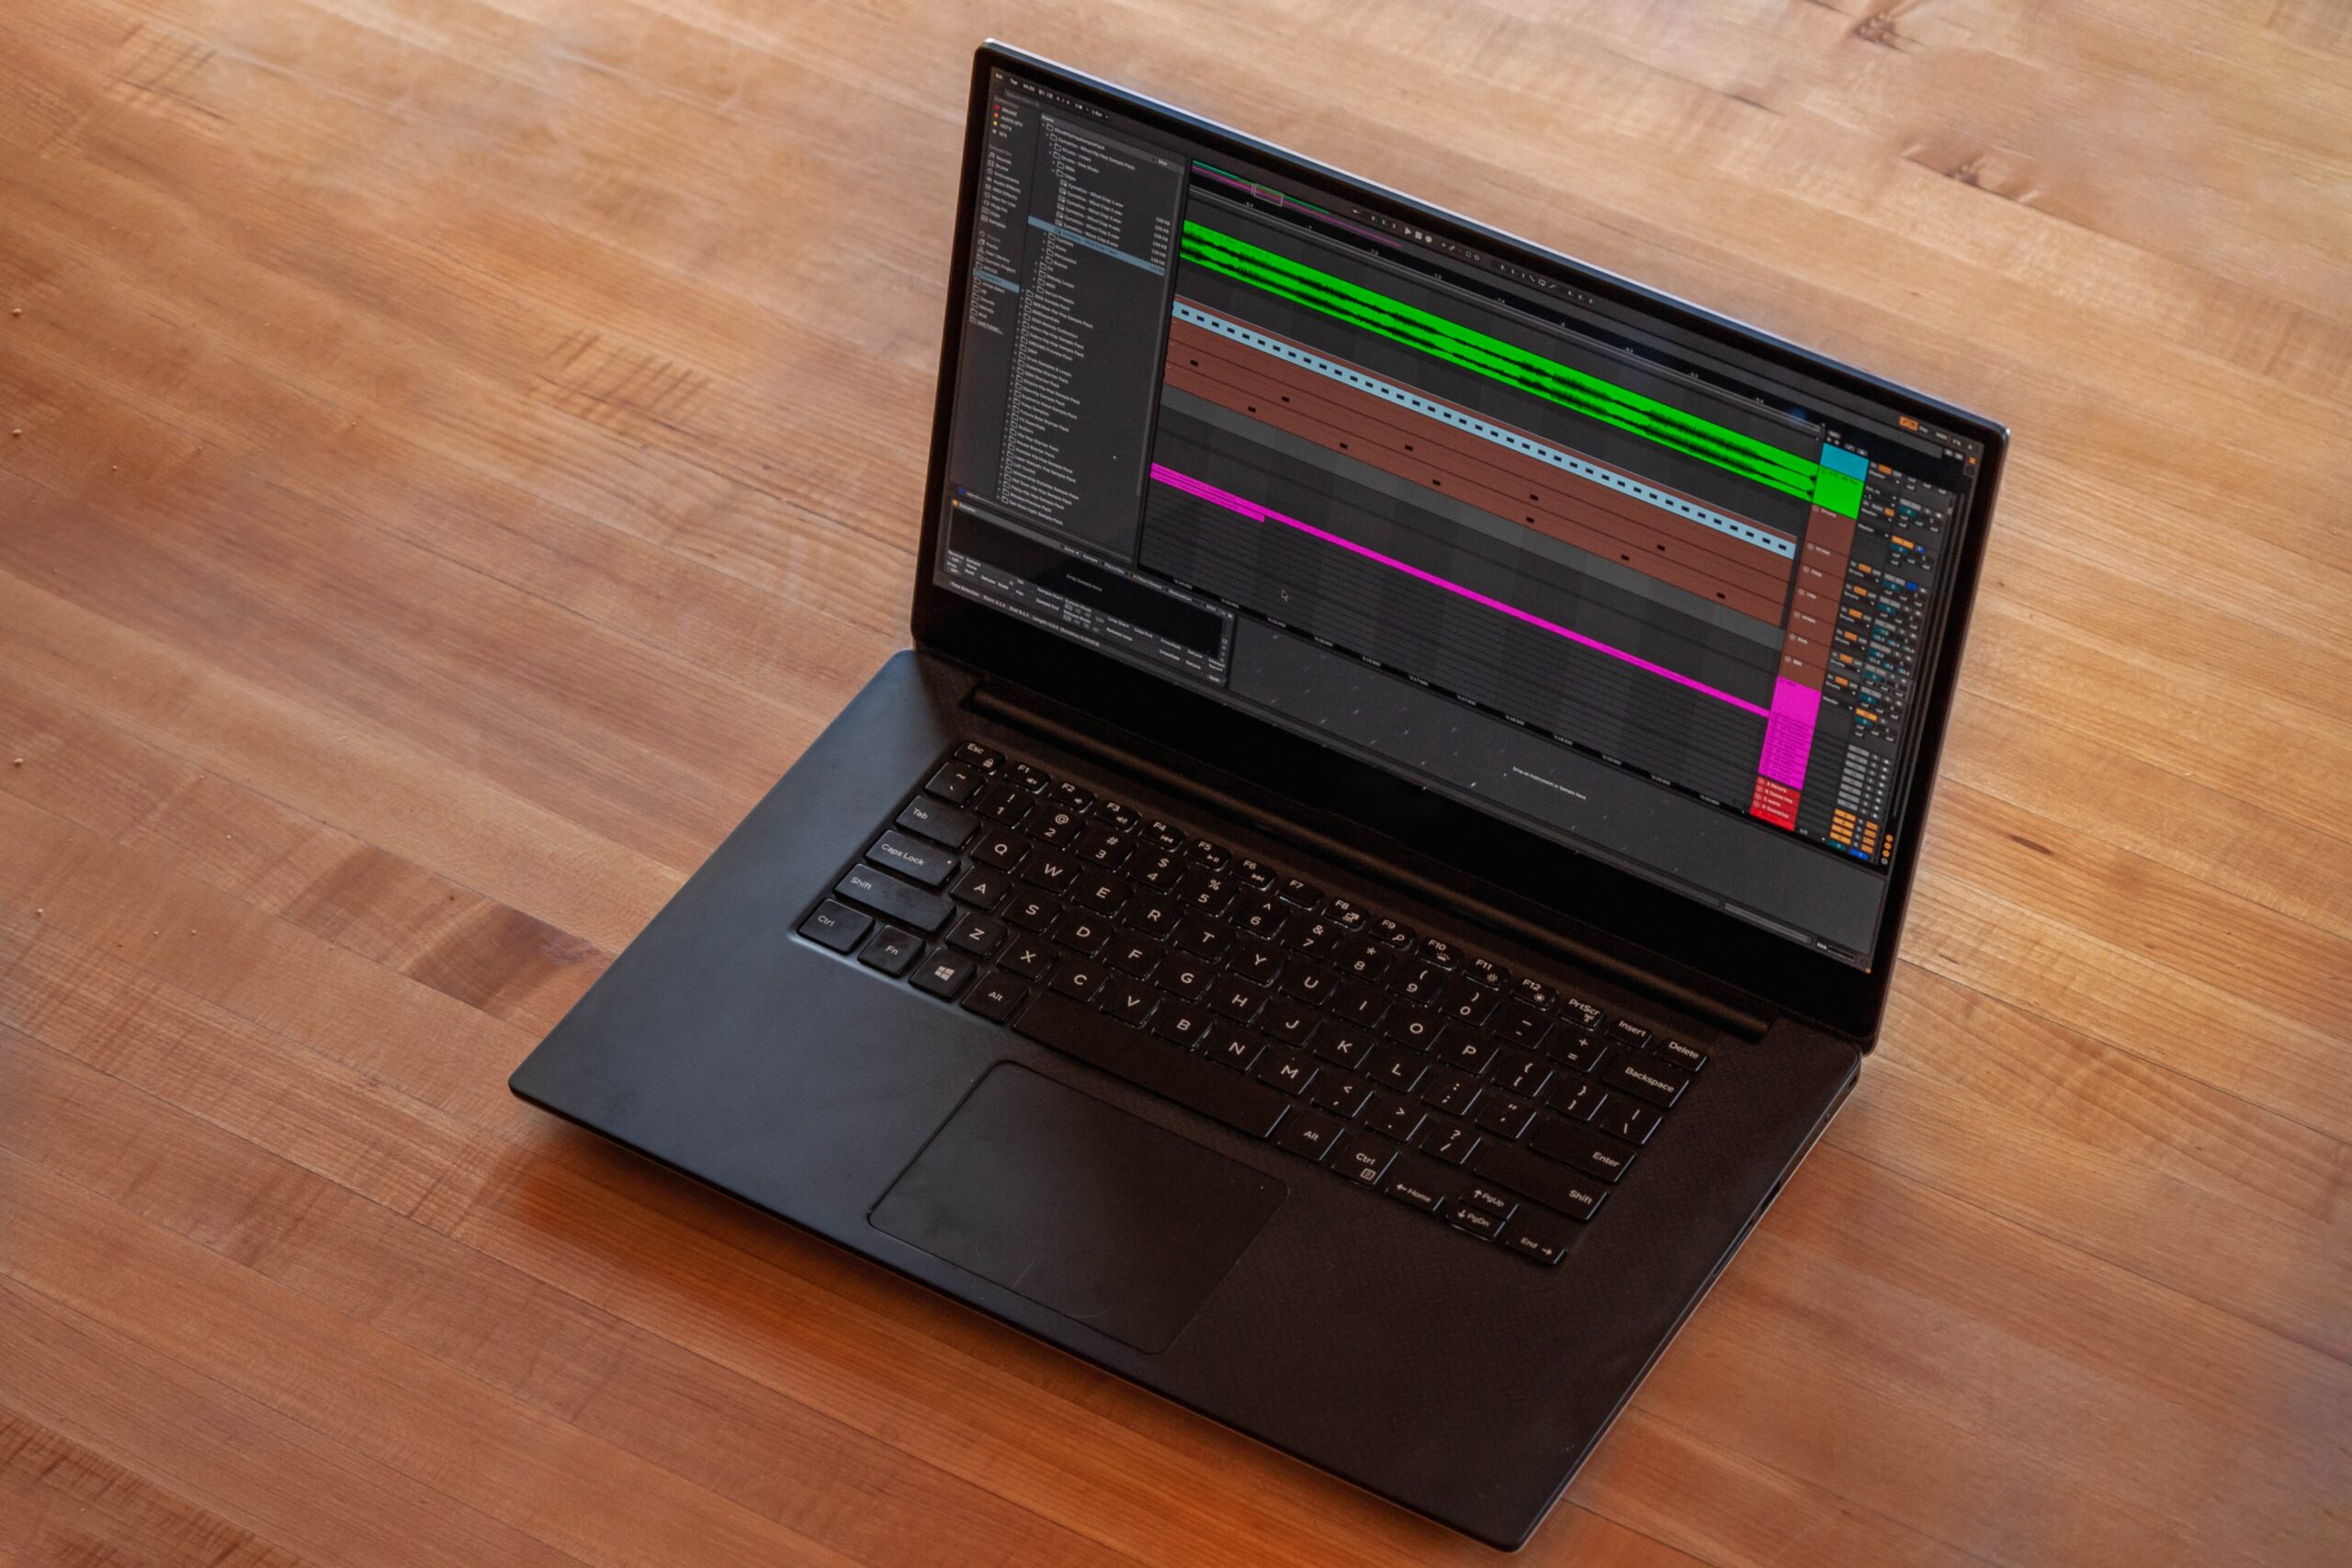 Ableton Live running on a laptop